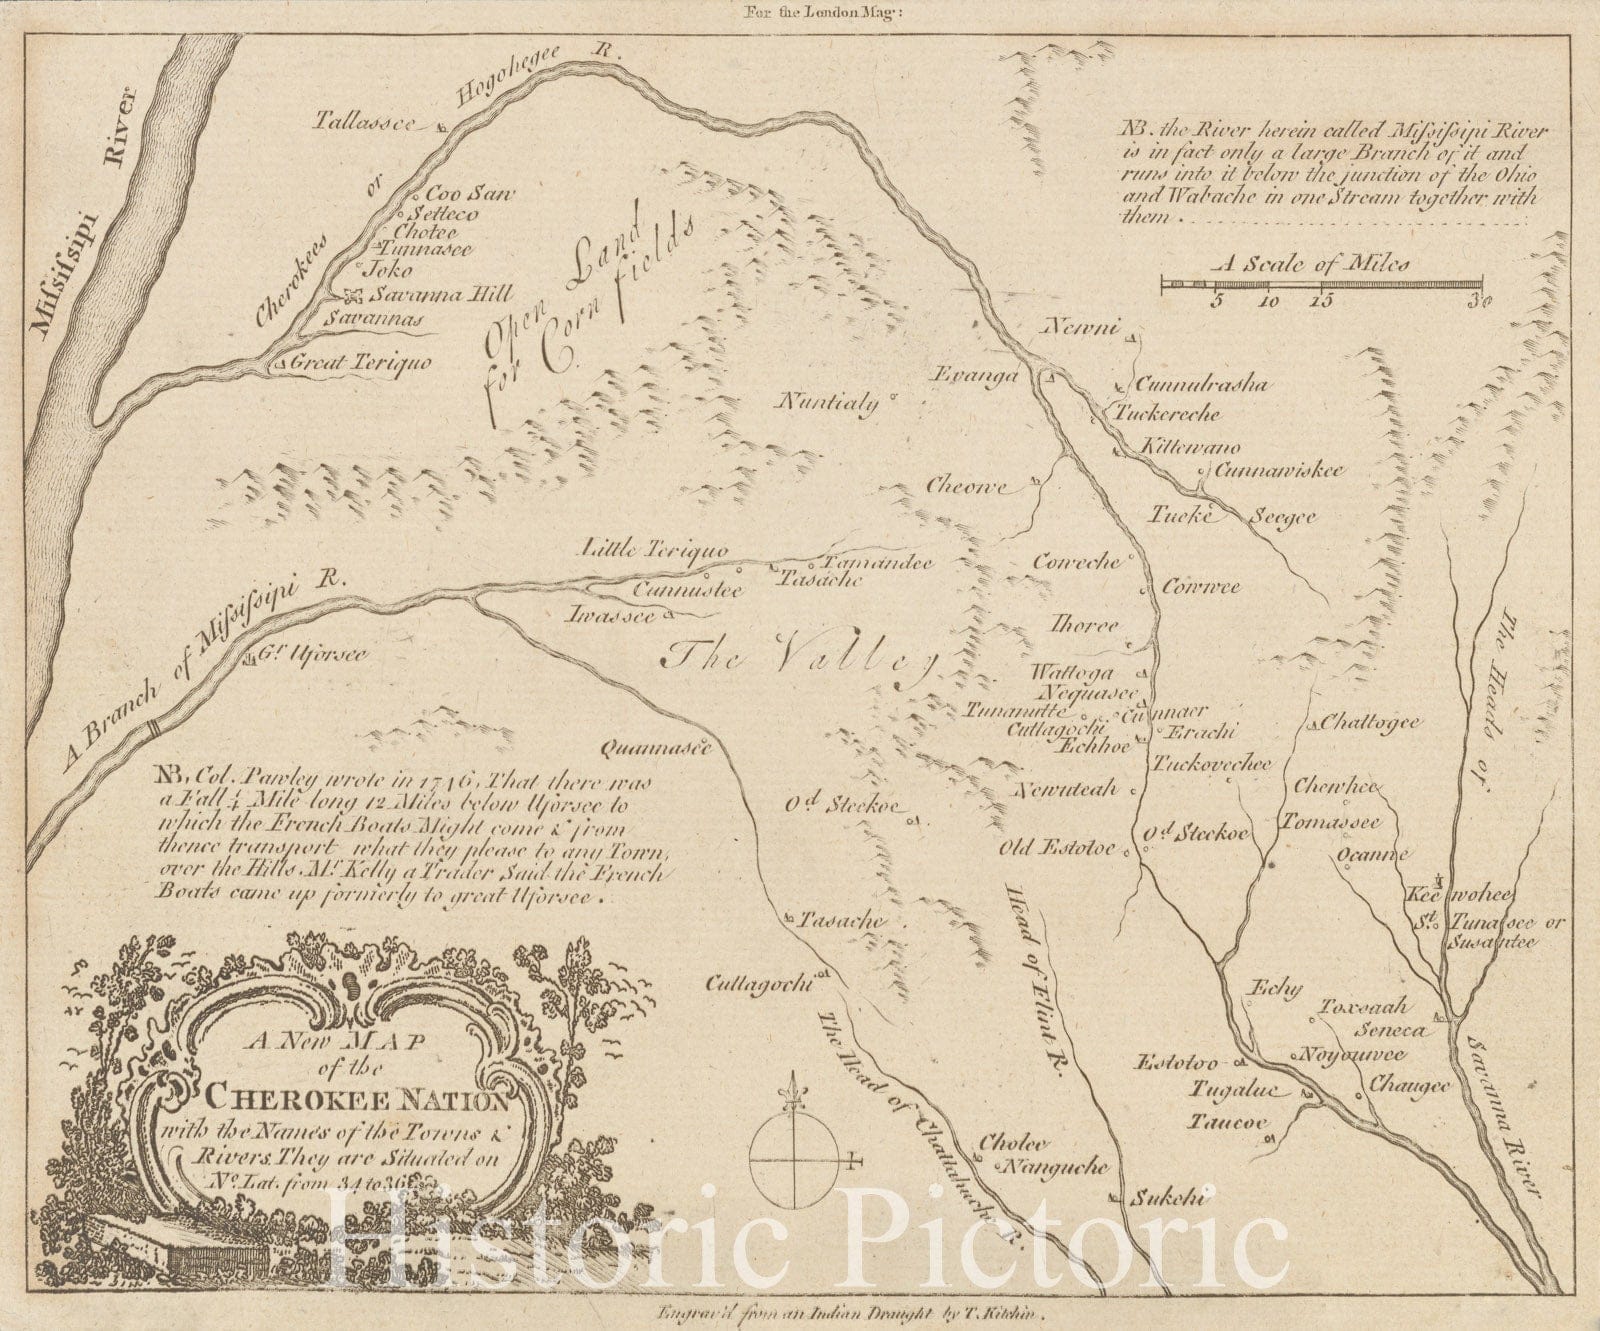 Historical Map, 1760 A New map of The Cherokee Nation : with The Names of The Towns & Rivers They are situated on No. LAT from 34 to 36, Vintage Wall Art